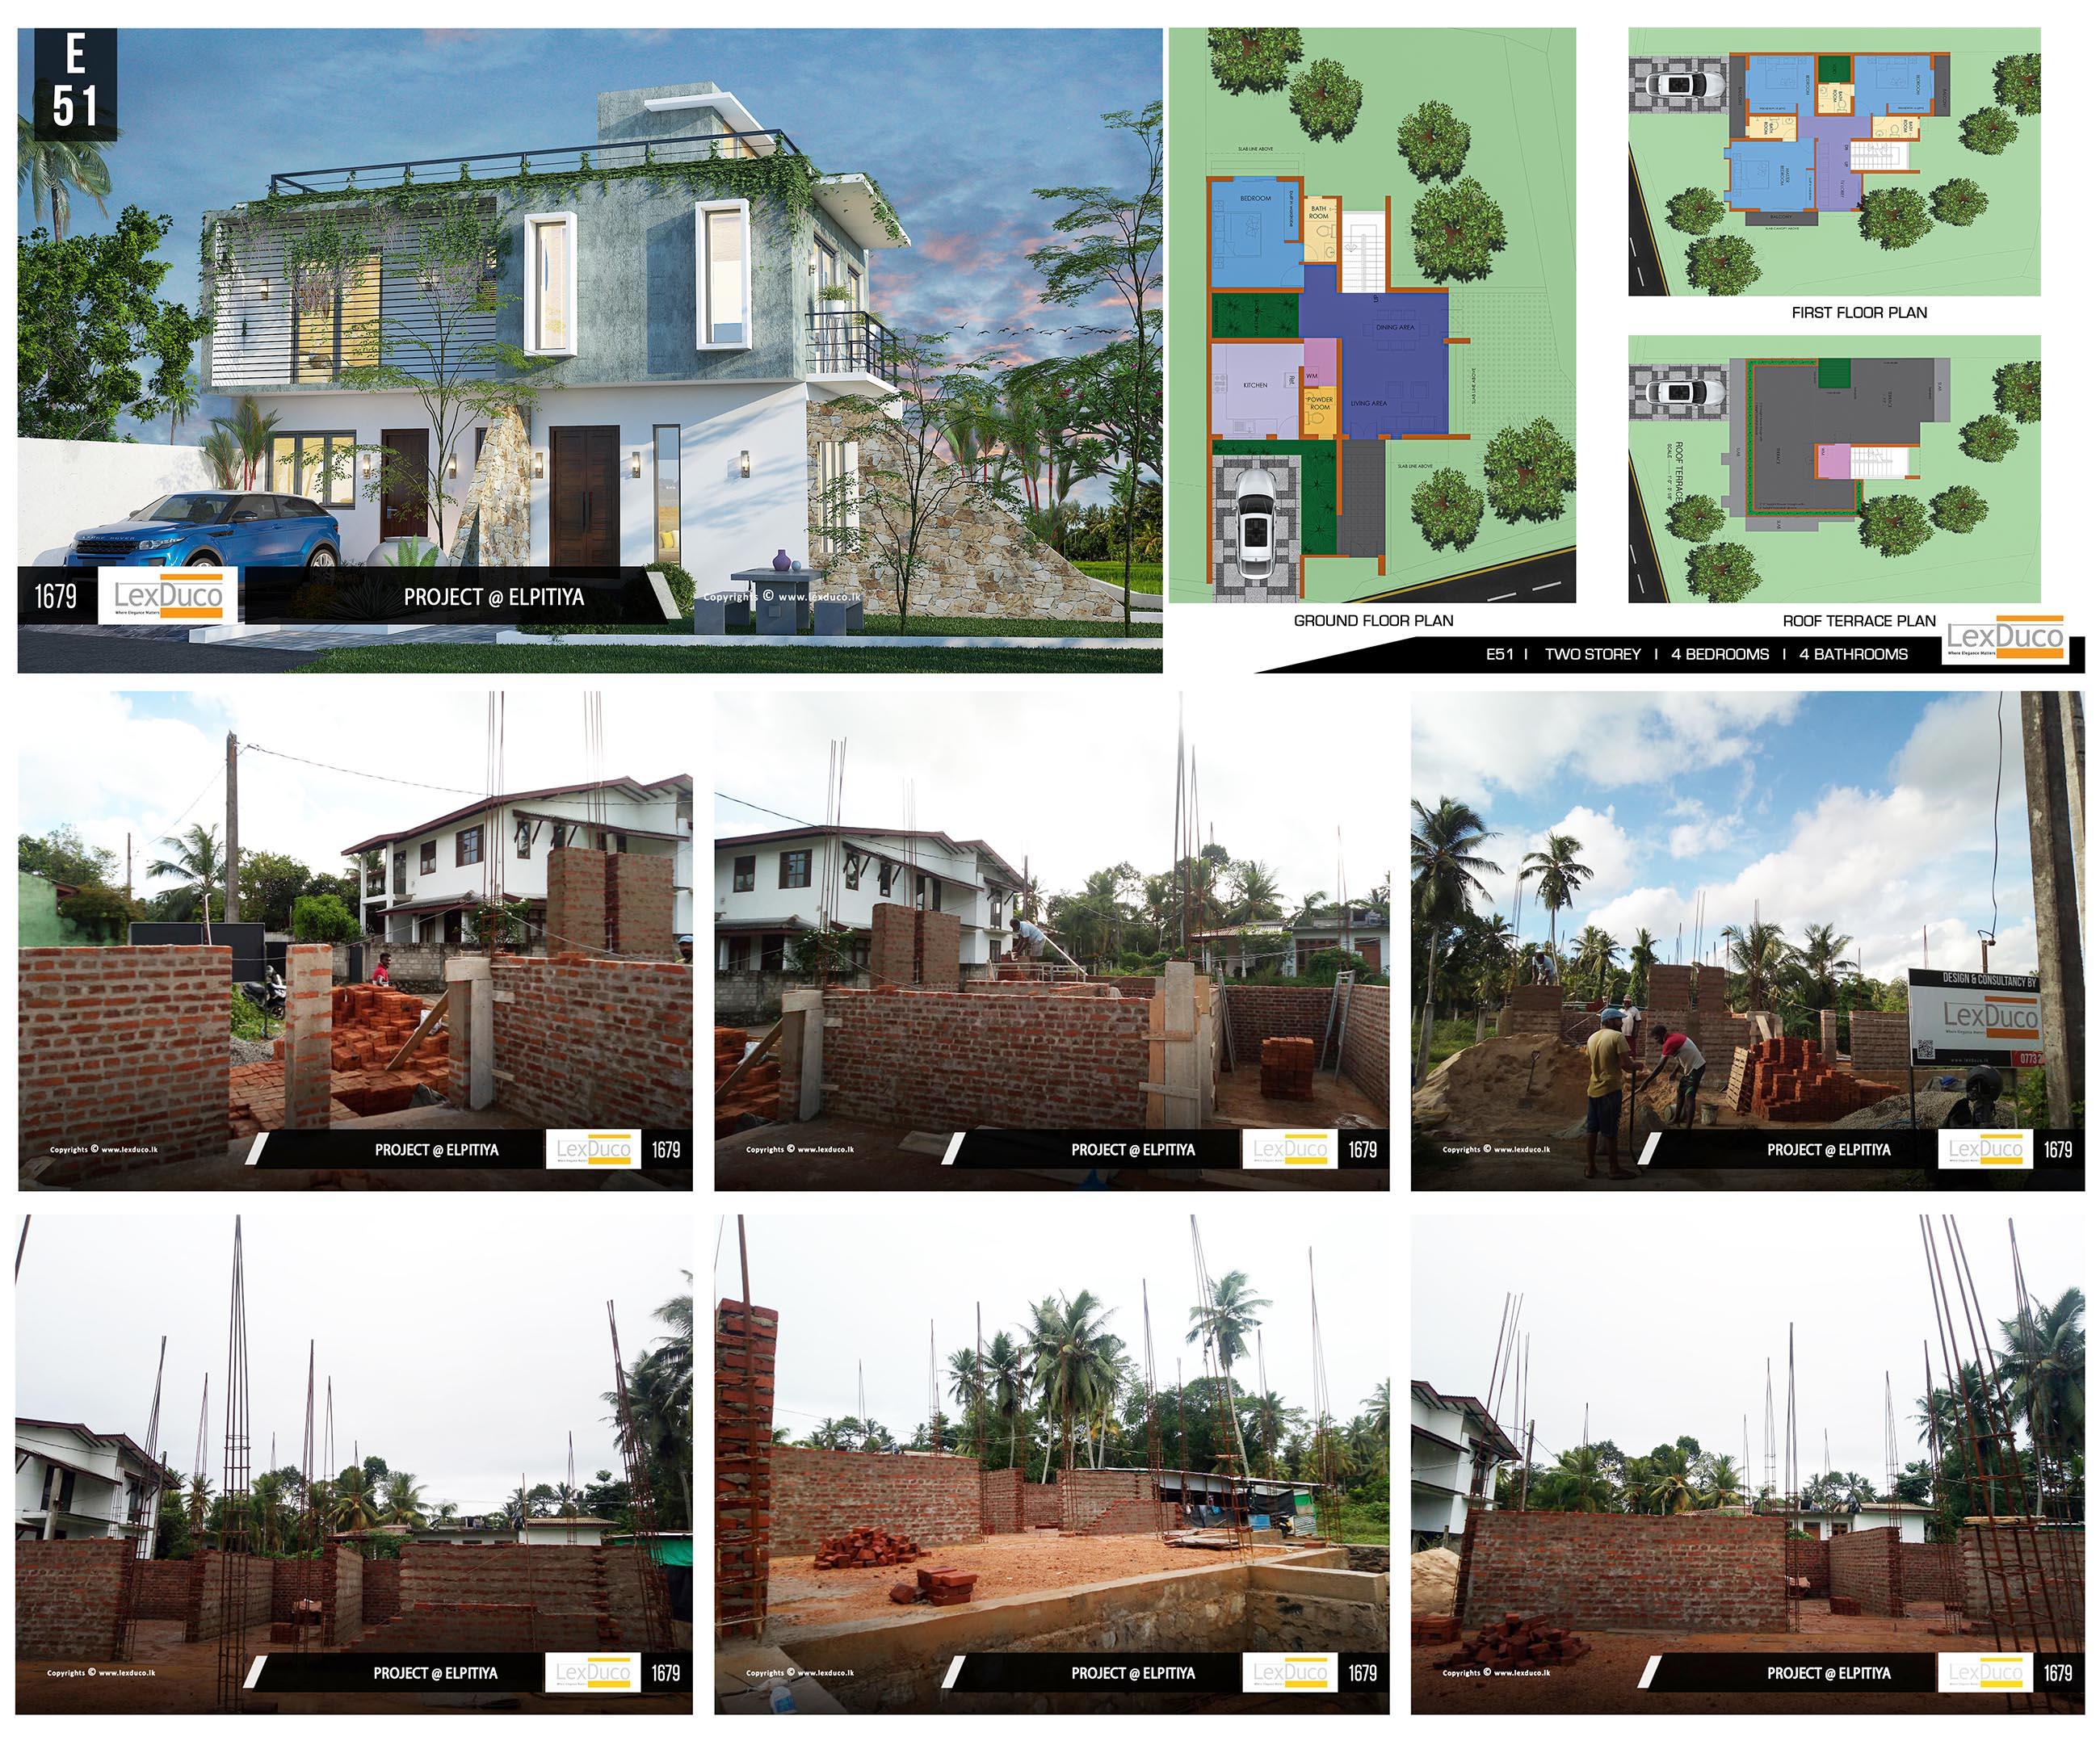 Residential Housing Project at Elpitiya | Lex Duco